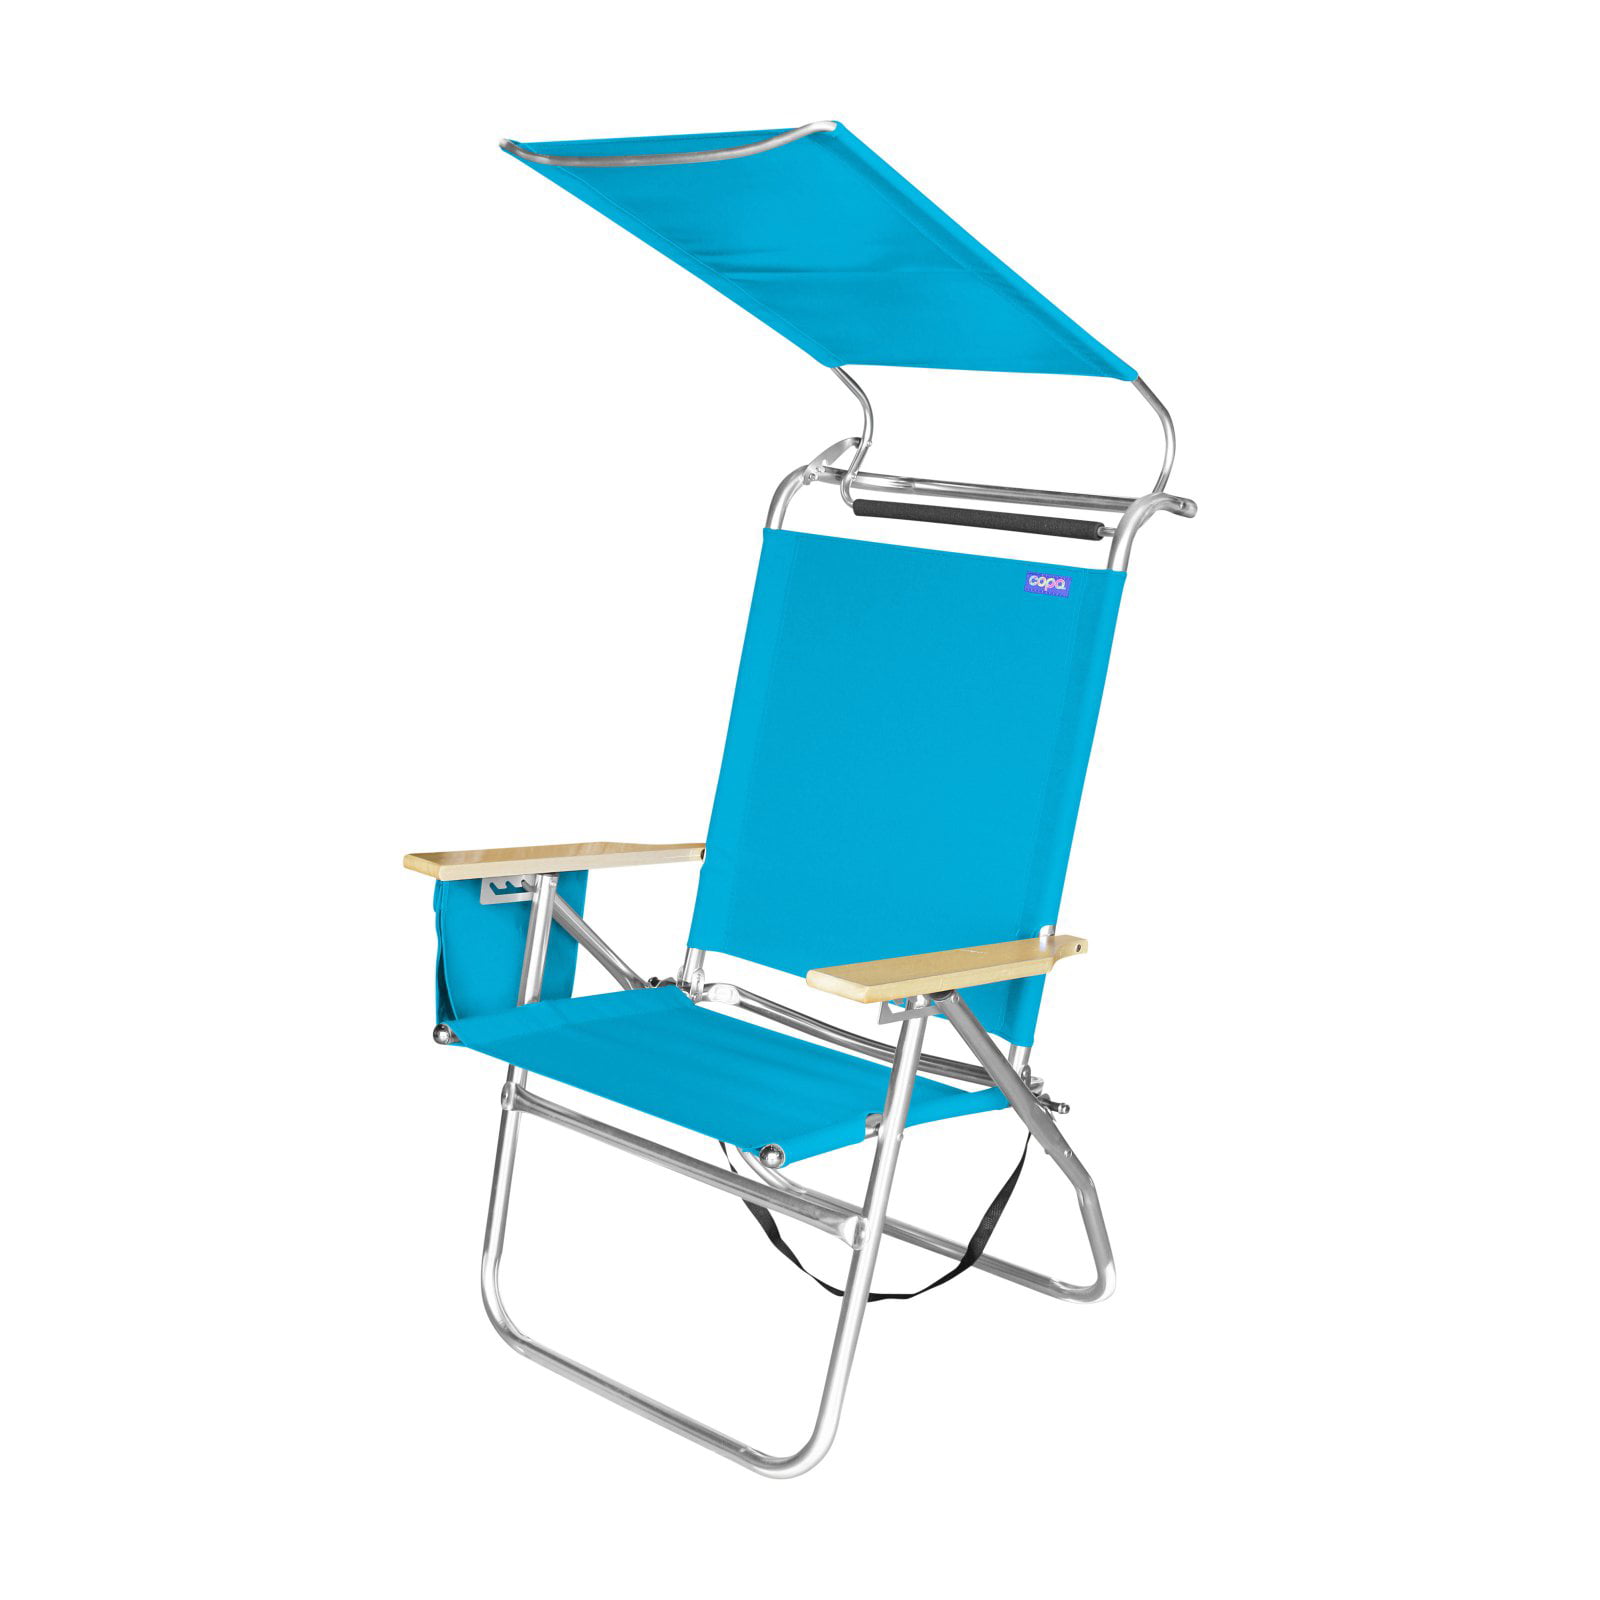 New Canopy Beach Chair Walmart for Small Space